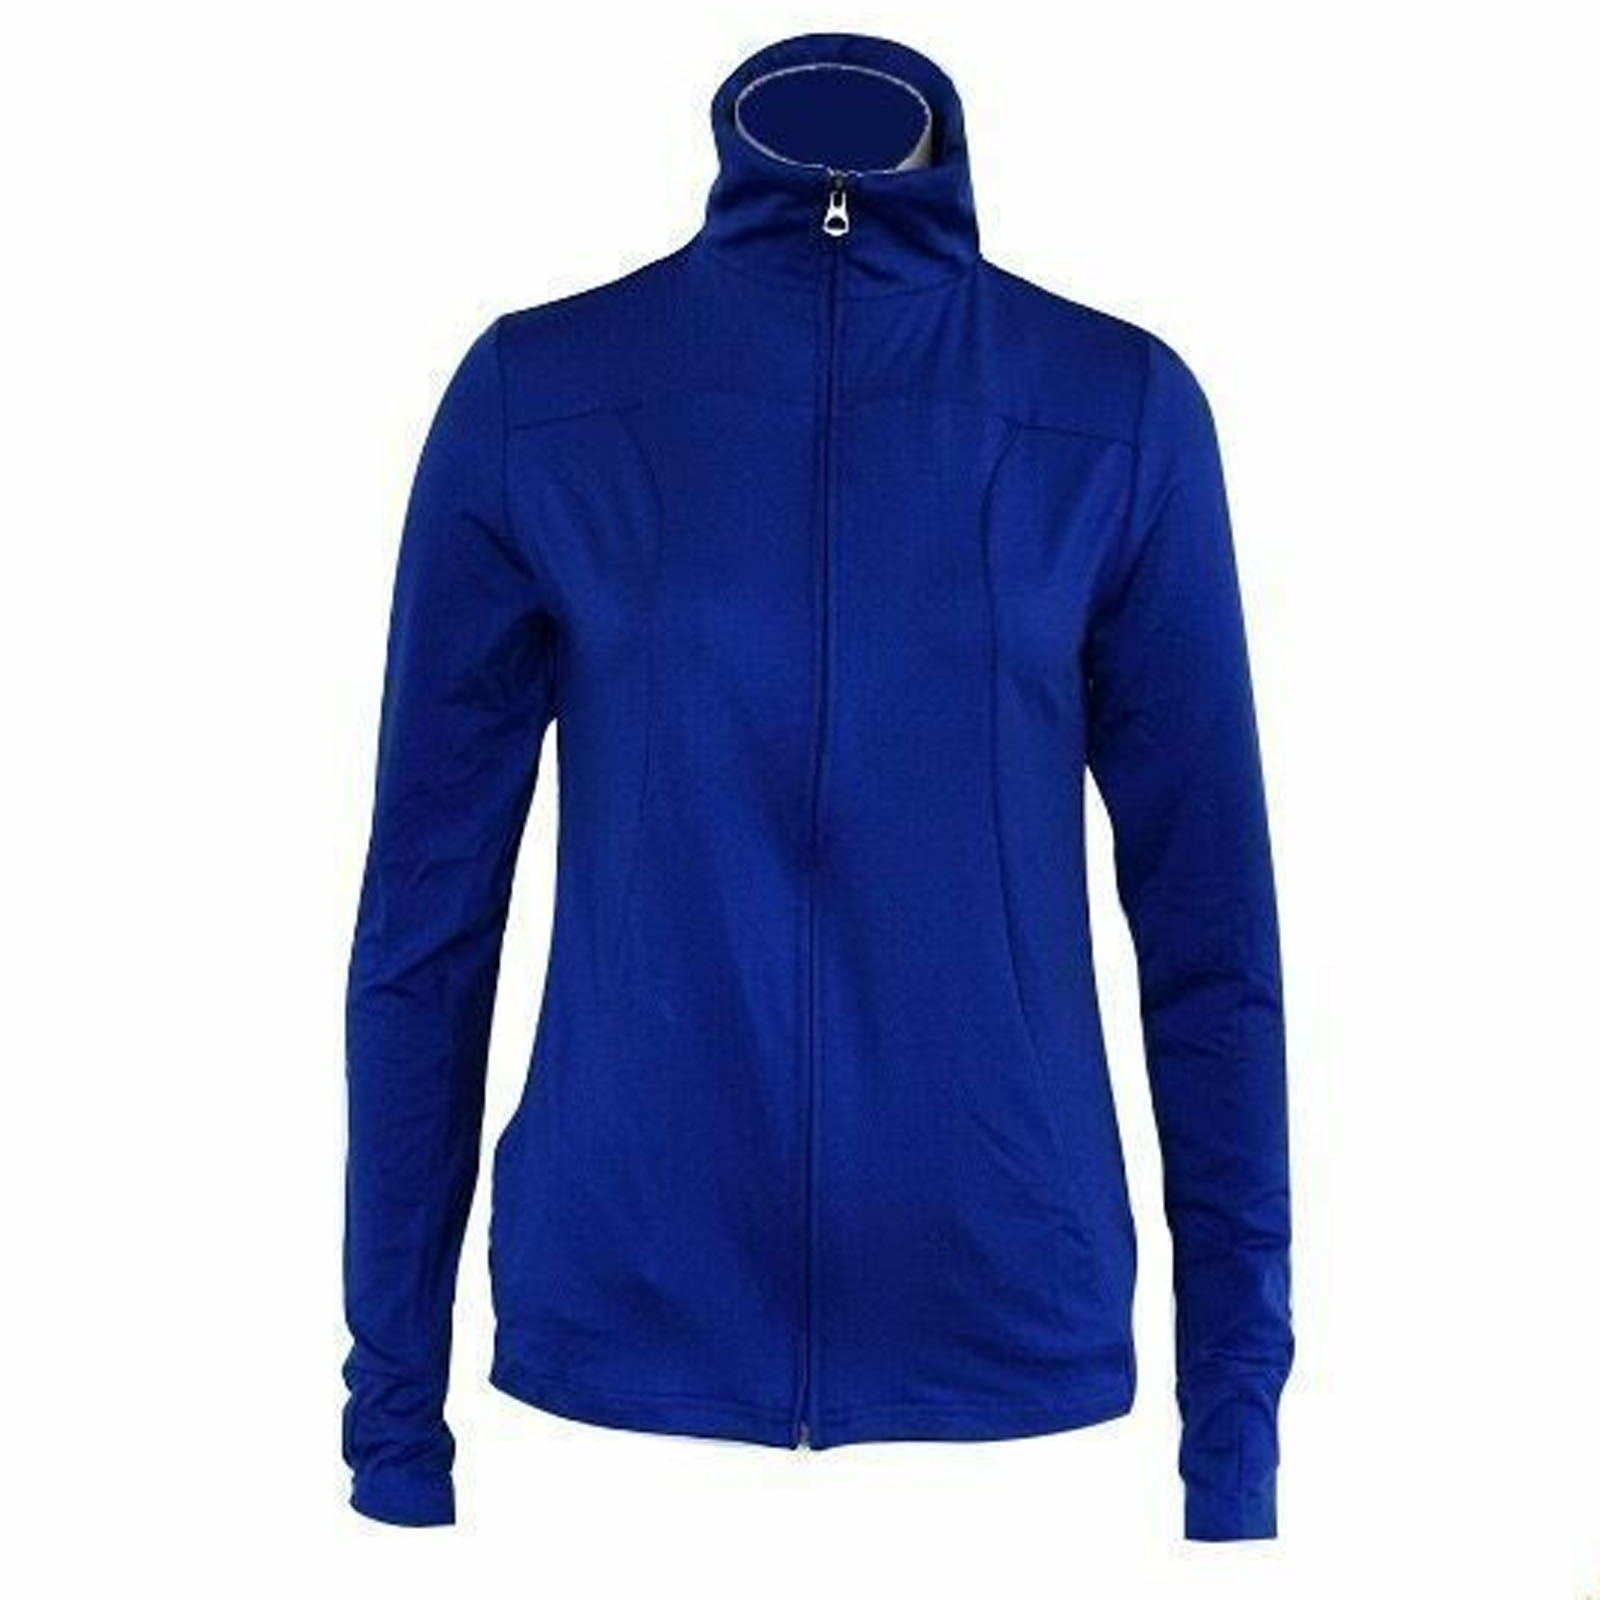 Women's Active Stretch Jacket Full Zip Gym Workout Casual w Pockets